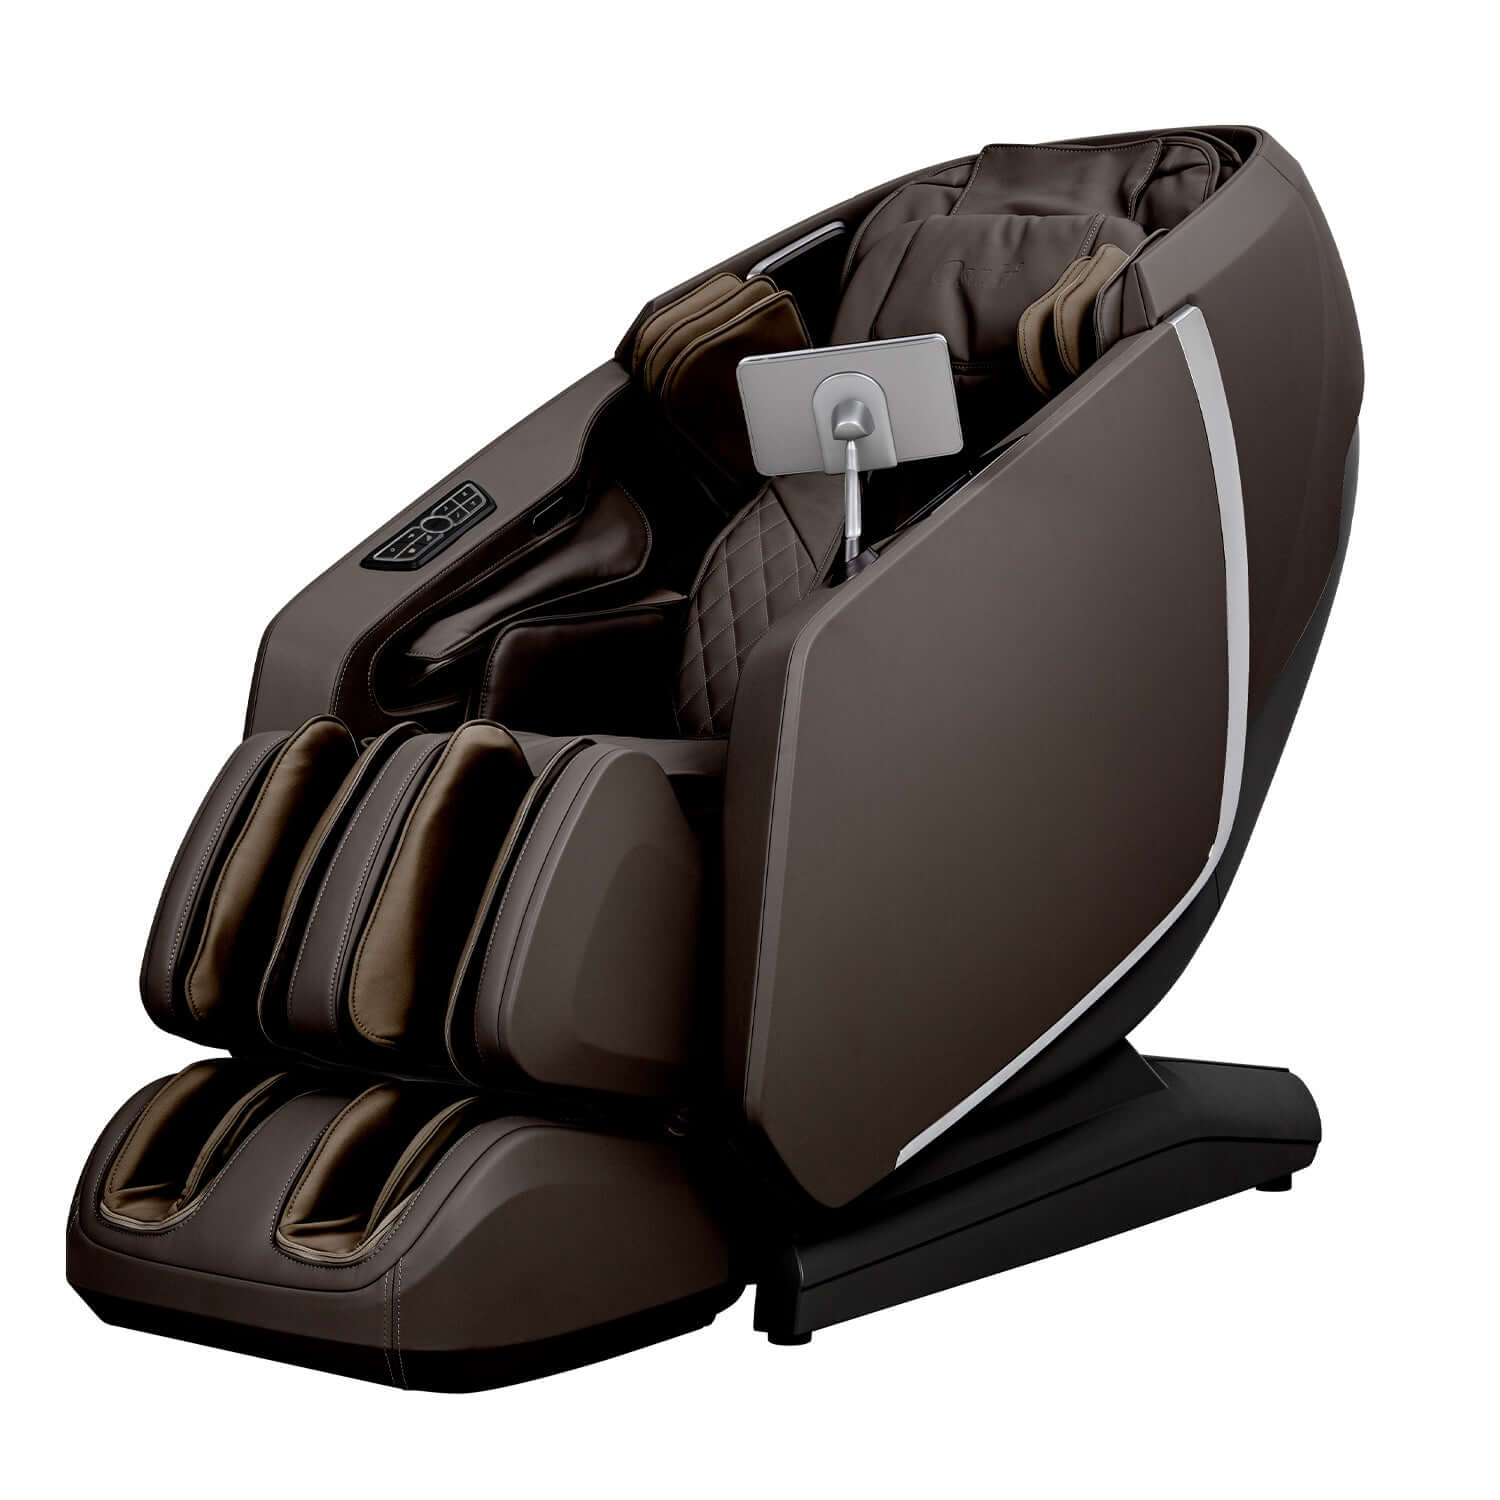 Osaki OS-Highpointe 4D Massage Chair - sku-45630732468540Dark BrownCurbside - Free5 Year(3 Years Full Service & Additional 2 Years Parts)Clearance ChairMassage ChairRecovAthlete